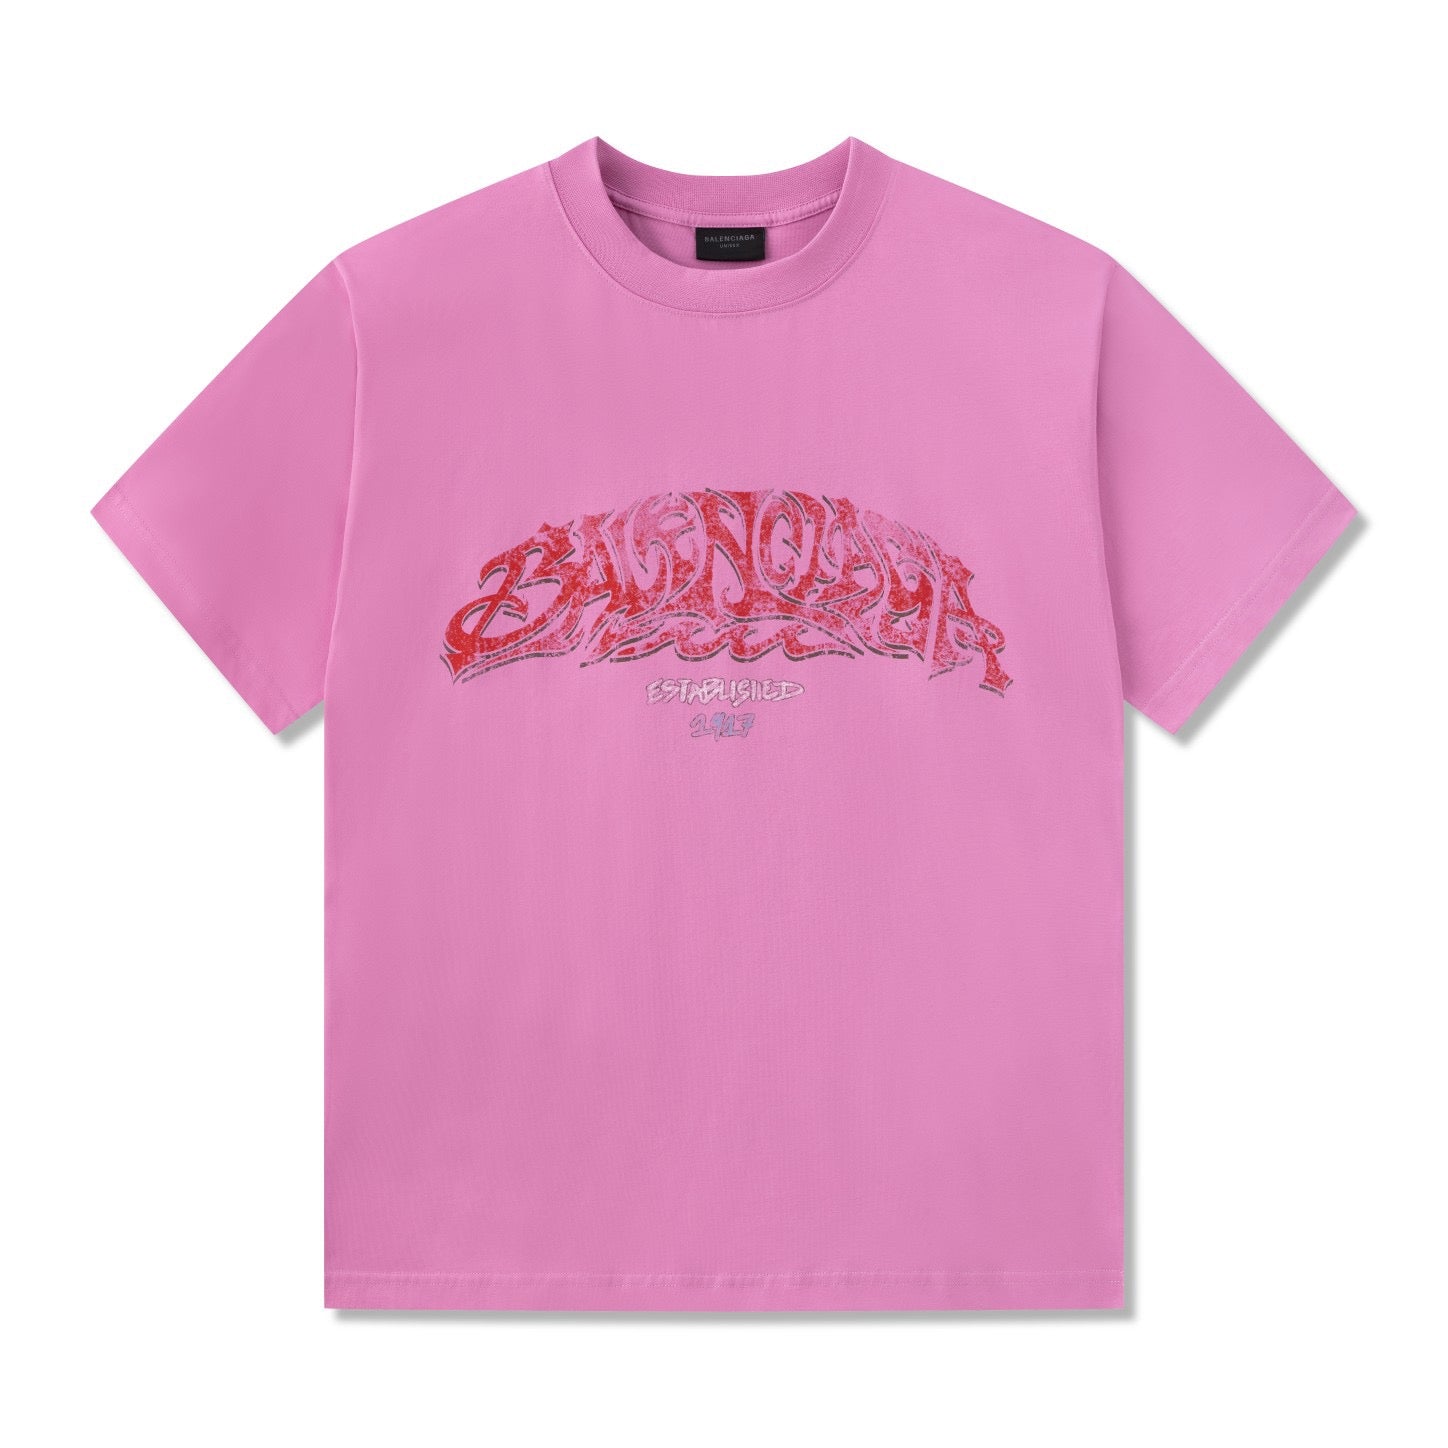 Black and Pink T-shirt